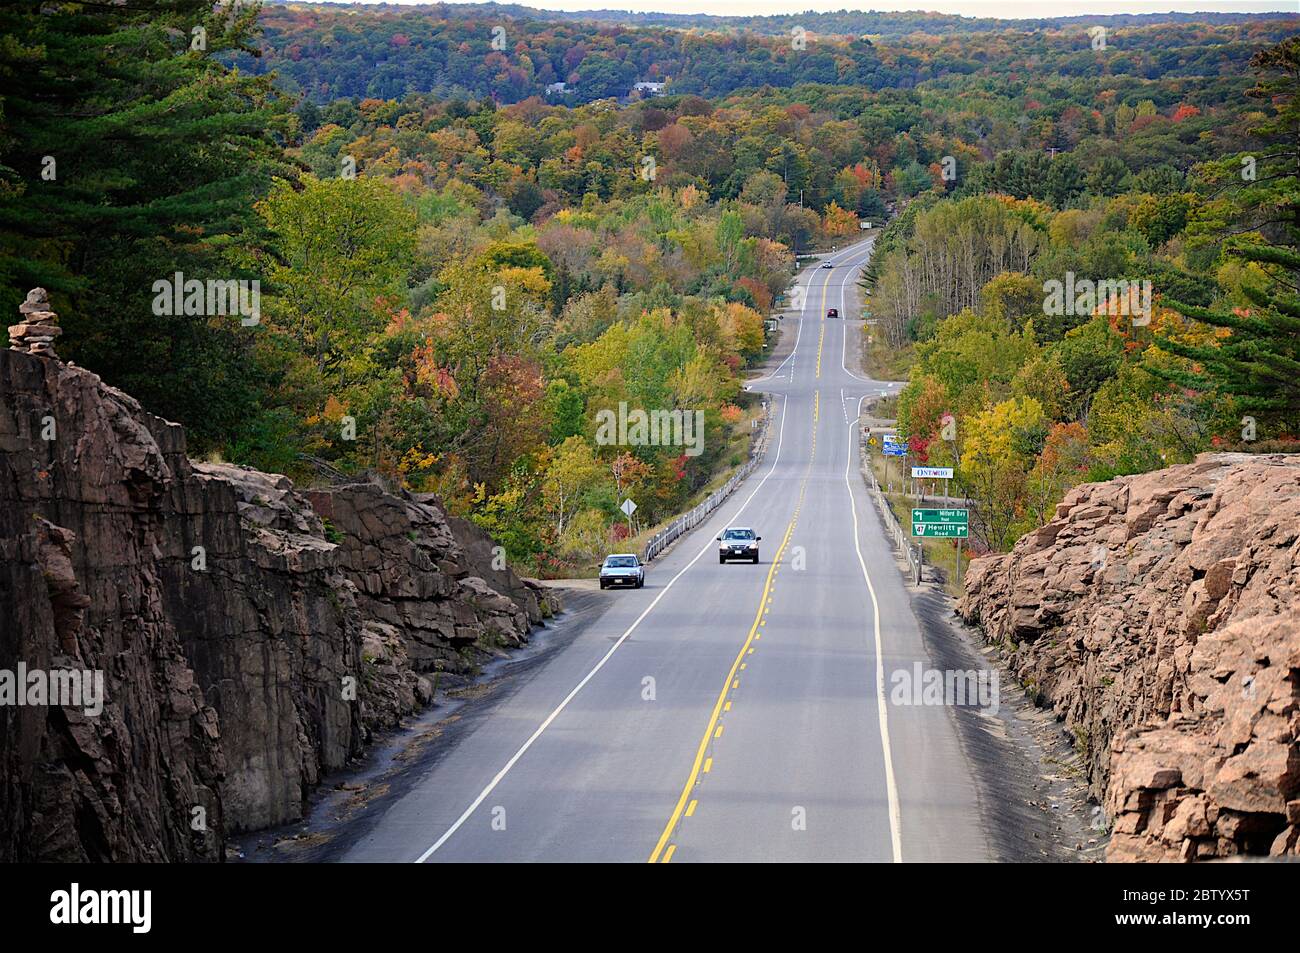 Milford Bay, Ontario / Canada - 10/05/2008: Mountain road. Landscape with rocks, autumn leaf color, and beautiful asphalt road in autumn. Stock Photo